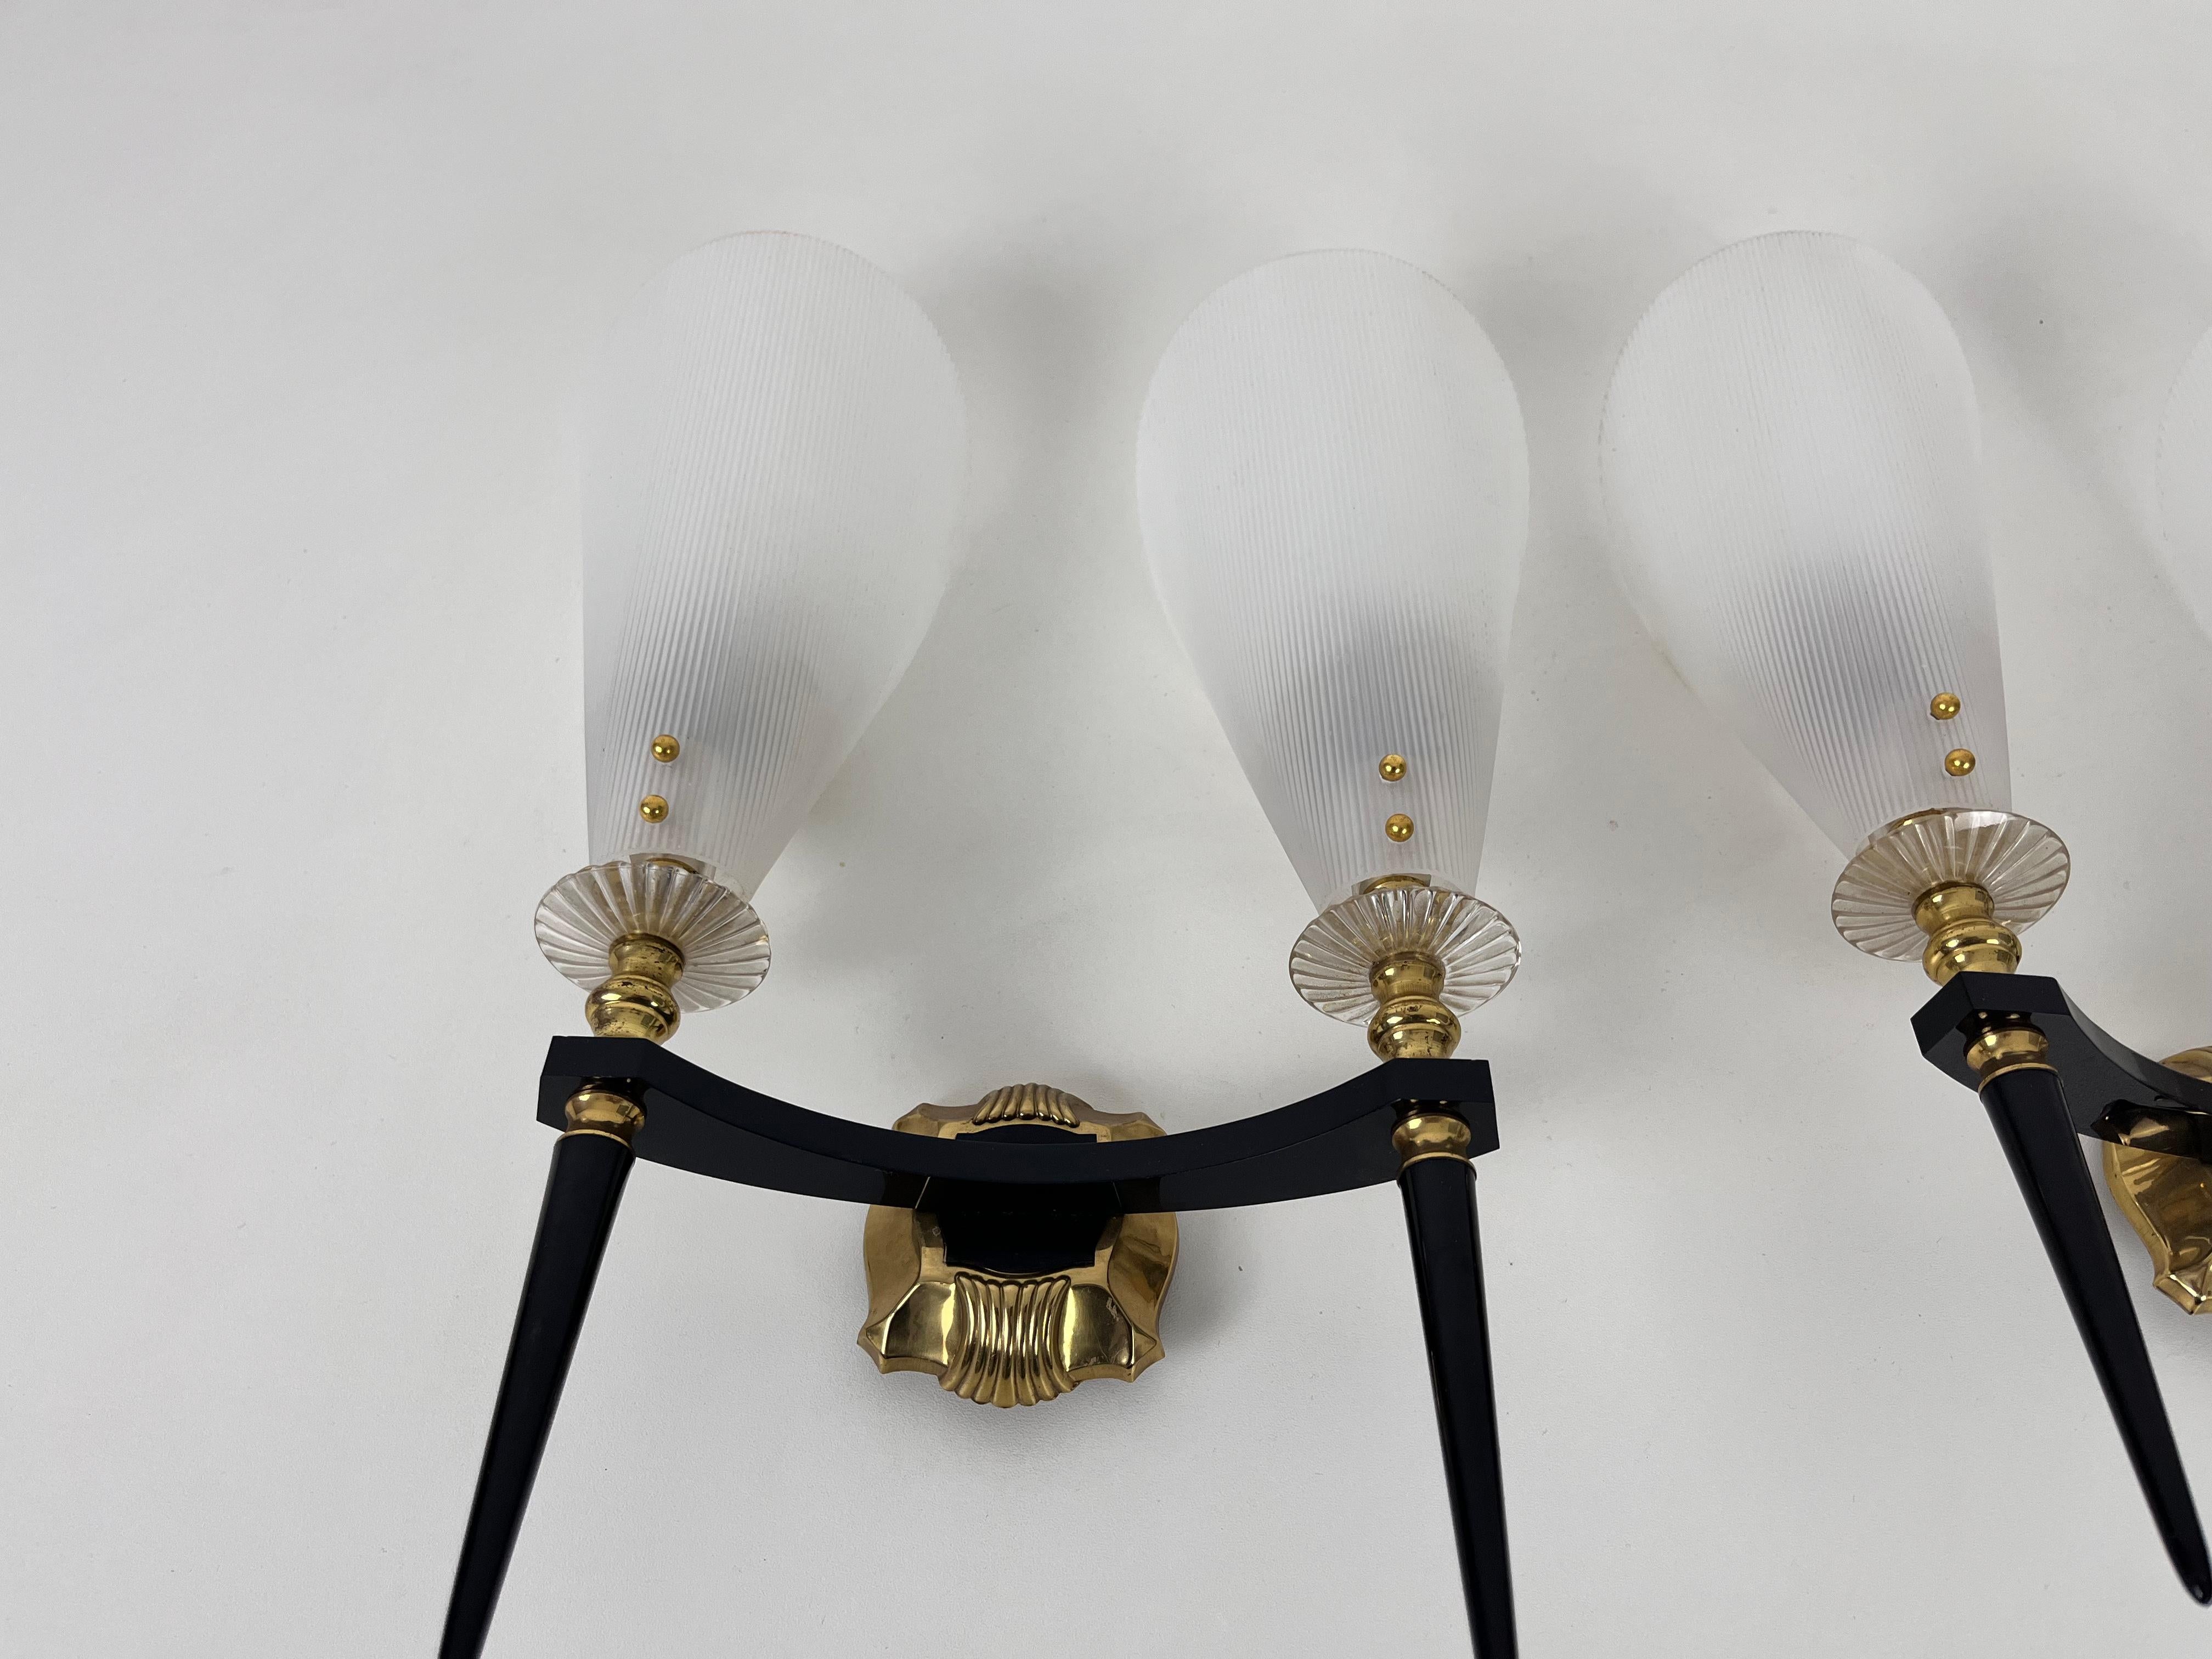 French Pair of 2 Brass and Plexiglass Wall Lamps by Maison Arlus, 1960, France For Sale